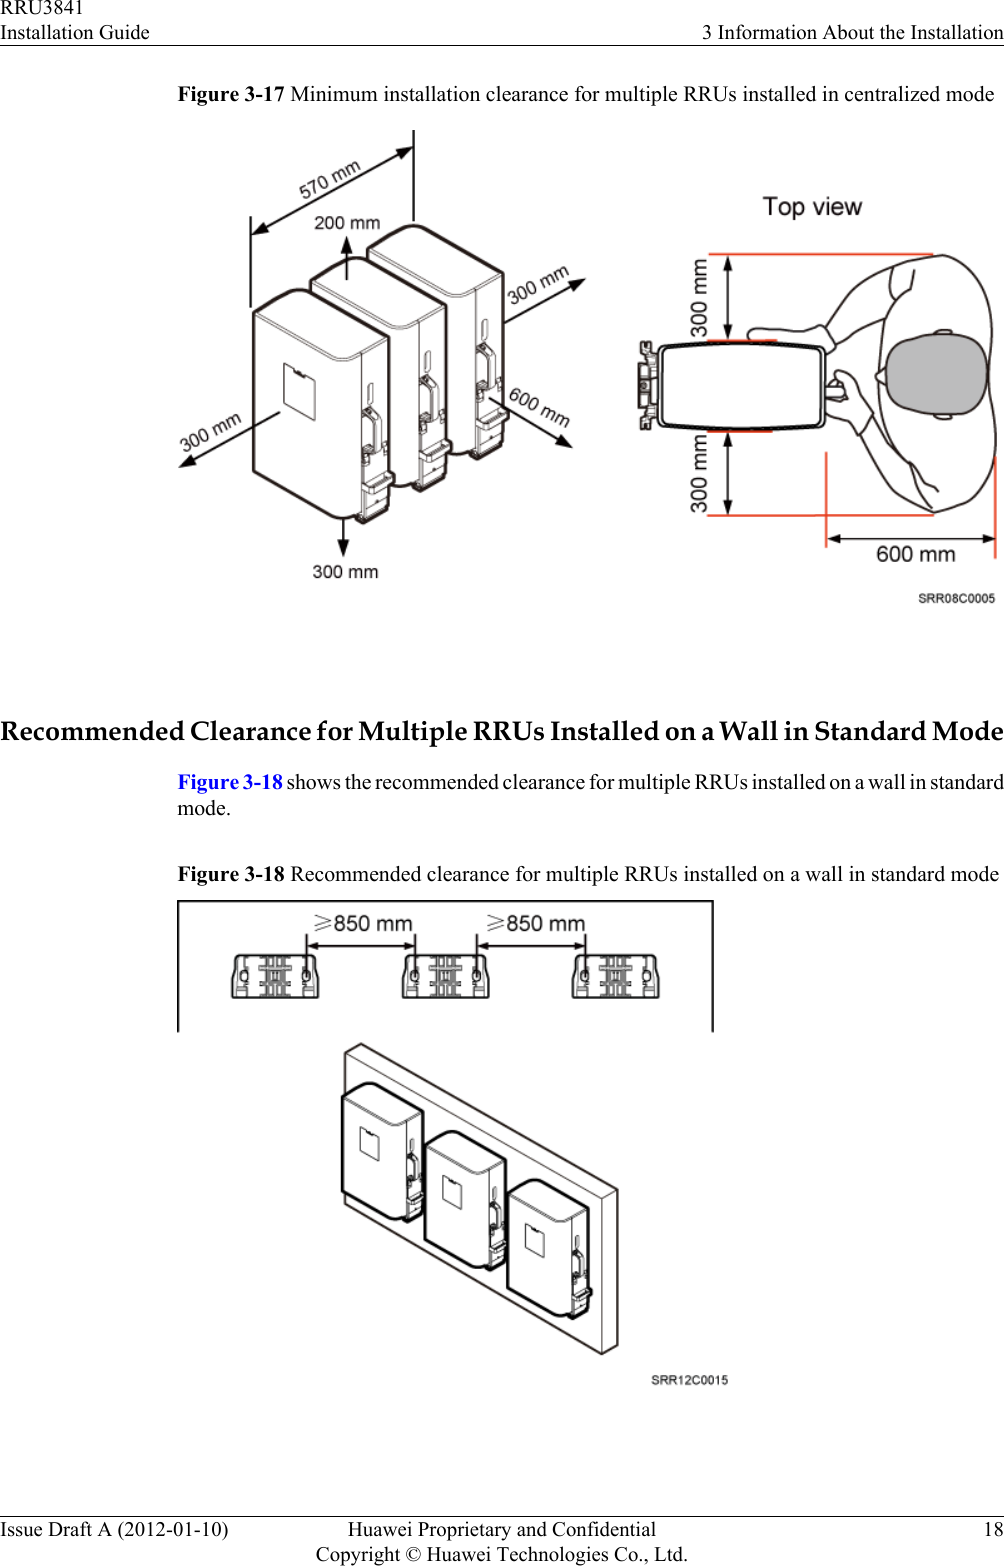 Figure 3-17 Minimum installation clearance for multiple RRUs installed in centralized mode Recommended Clearance for Multiple RRUs Installed on a Wall in Standard ModeFigure 3-18 shows the recommended clearance for multiple RRUs installed on a wall in standardmode.Figure 3-18 Recommended clearance for multiple RRUs installed on a wall in standard mode RRU3841Installation Guide 3 Information About the InstallationIssue Draft A (2012-01-10) Huawei Proprietary and ConfidentialCopyright © Huawei Technologies Co., Ltd.18